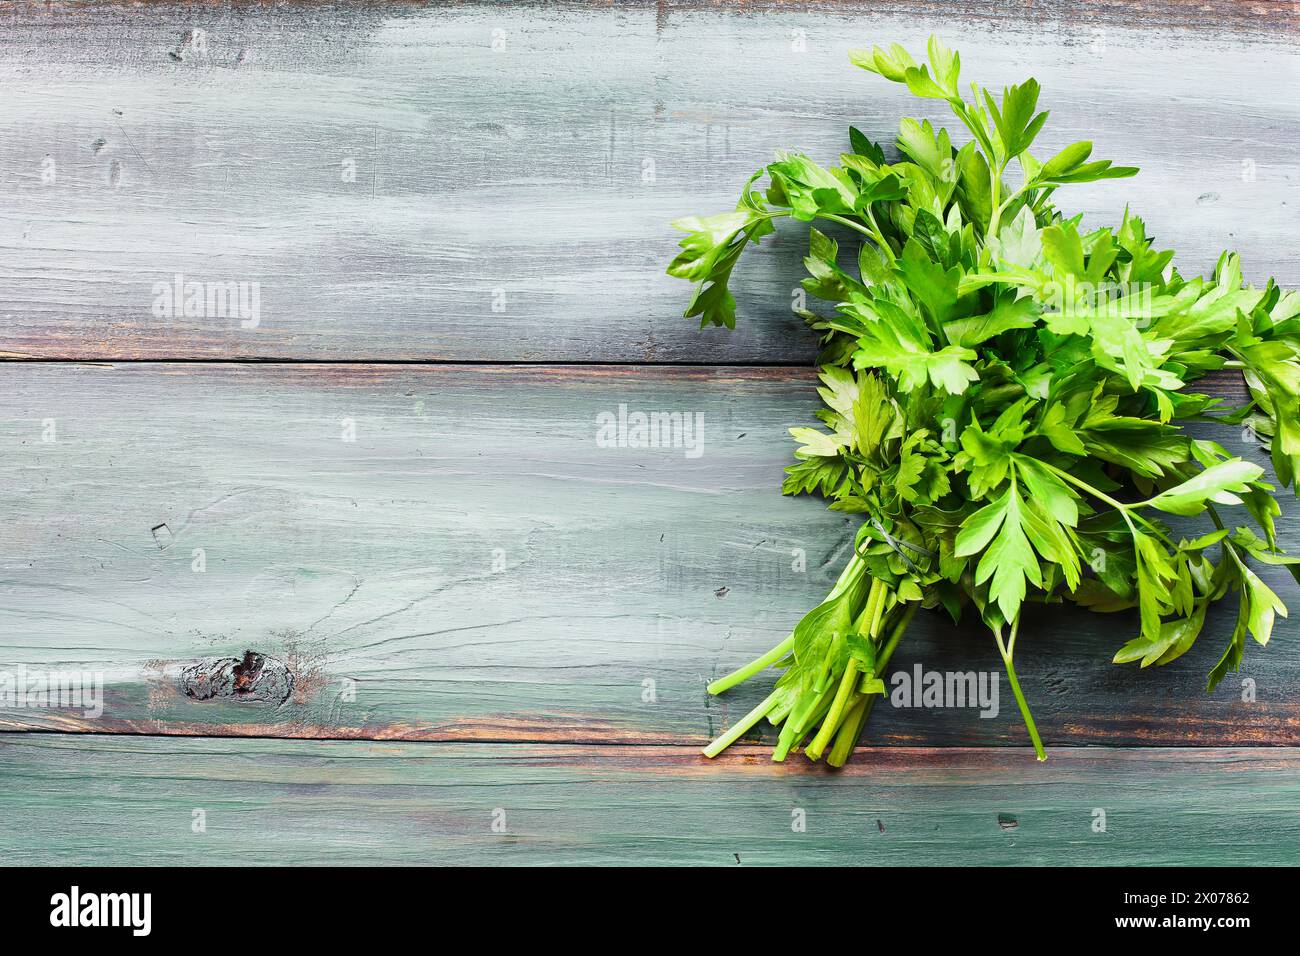 Bundle of fresh Italian flat leaf parsley herb over a painted background. Table top view. Overhead. Flatlay. Stock Photo